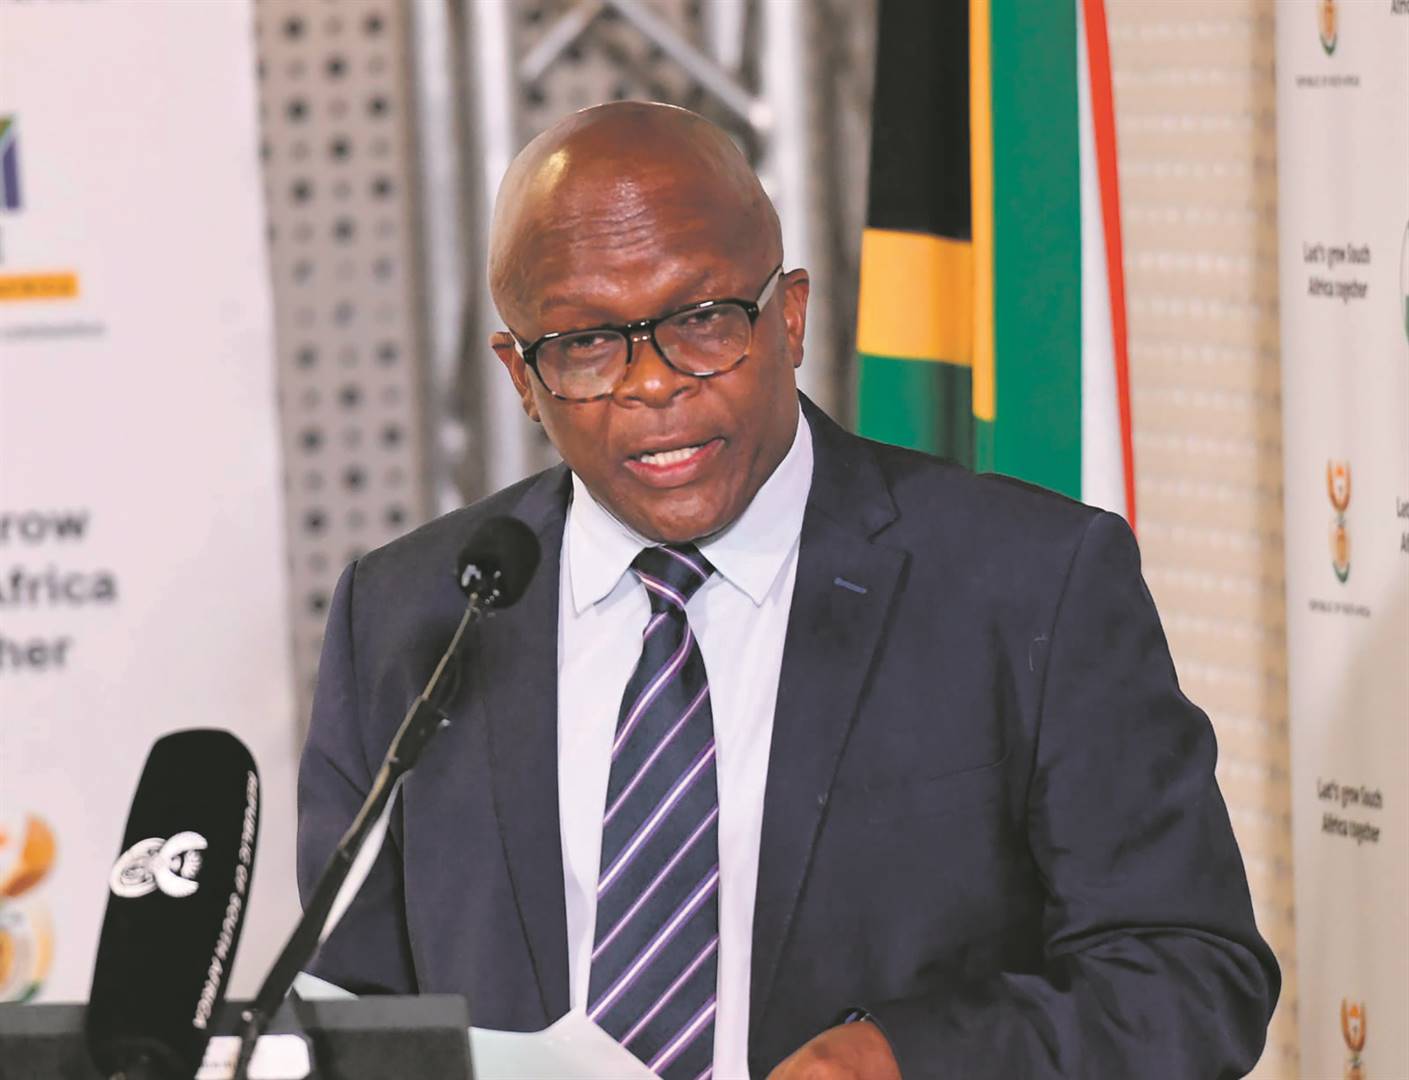 In a briefing on Thursday, Minister in the Presidency Mondli Gungubele said that Cabinet has approved the publication of the annual National Child Rights Status Report.